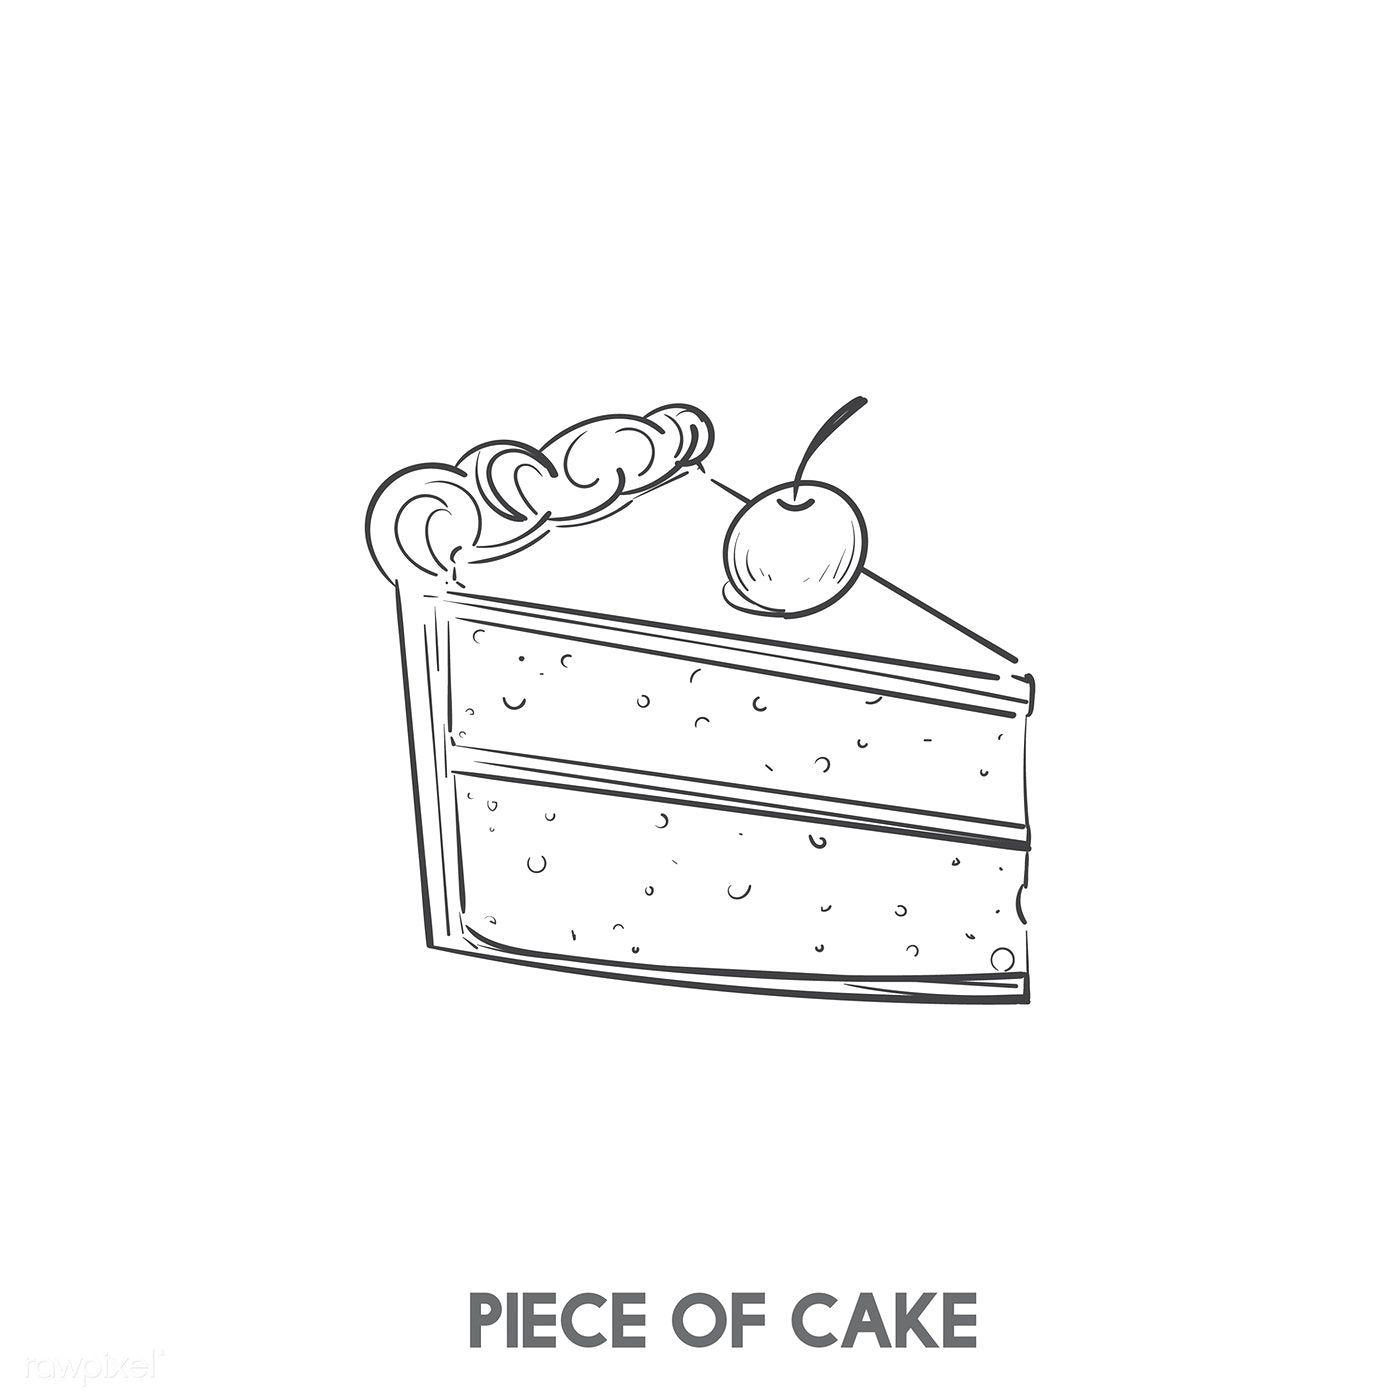 Download premium vector of a piece of cake 402757 -   11 baking cake Illustration
 ideas